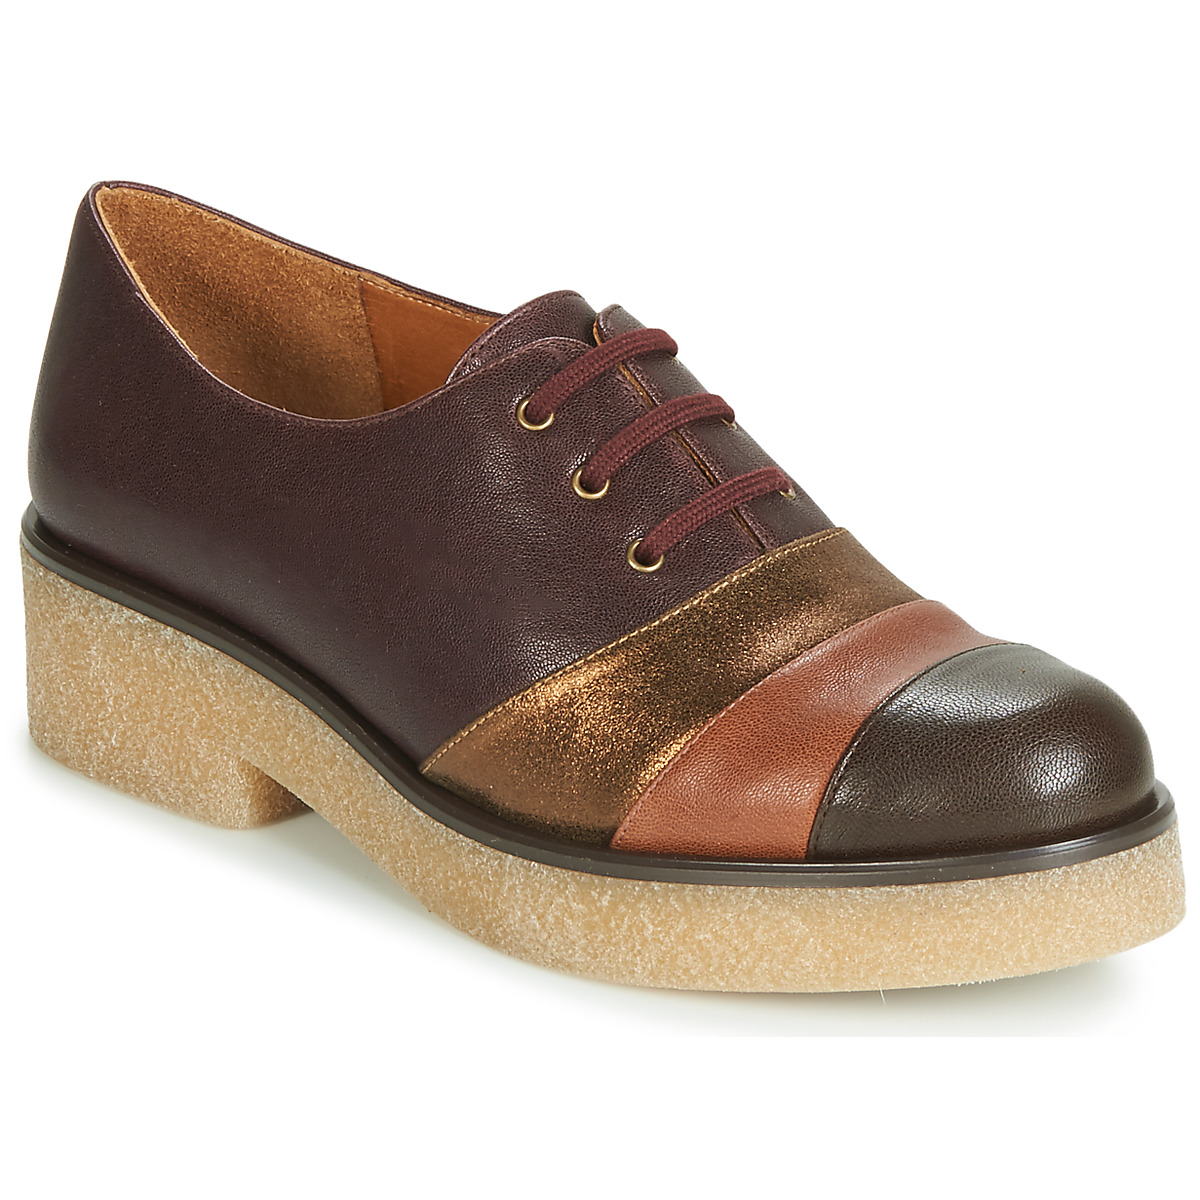 Buty Damskie Derby Chie Mihara YELLOW Bordeaux